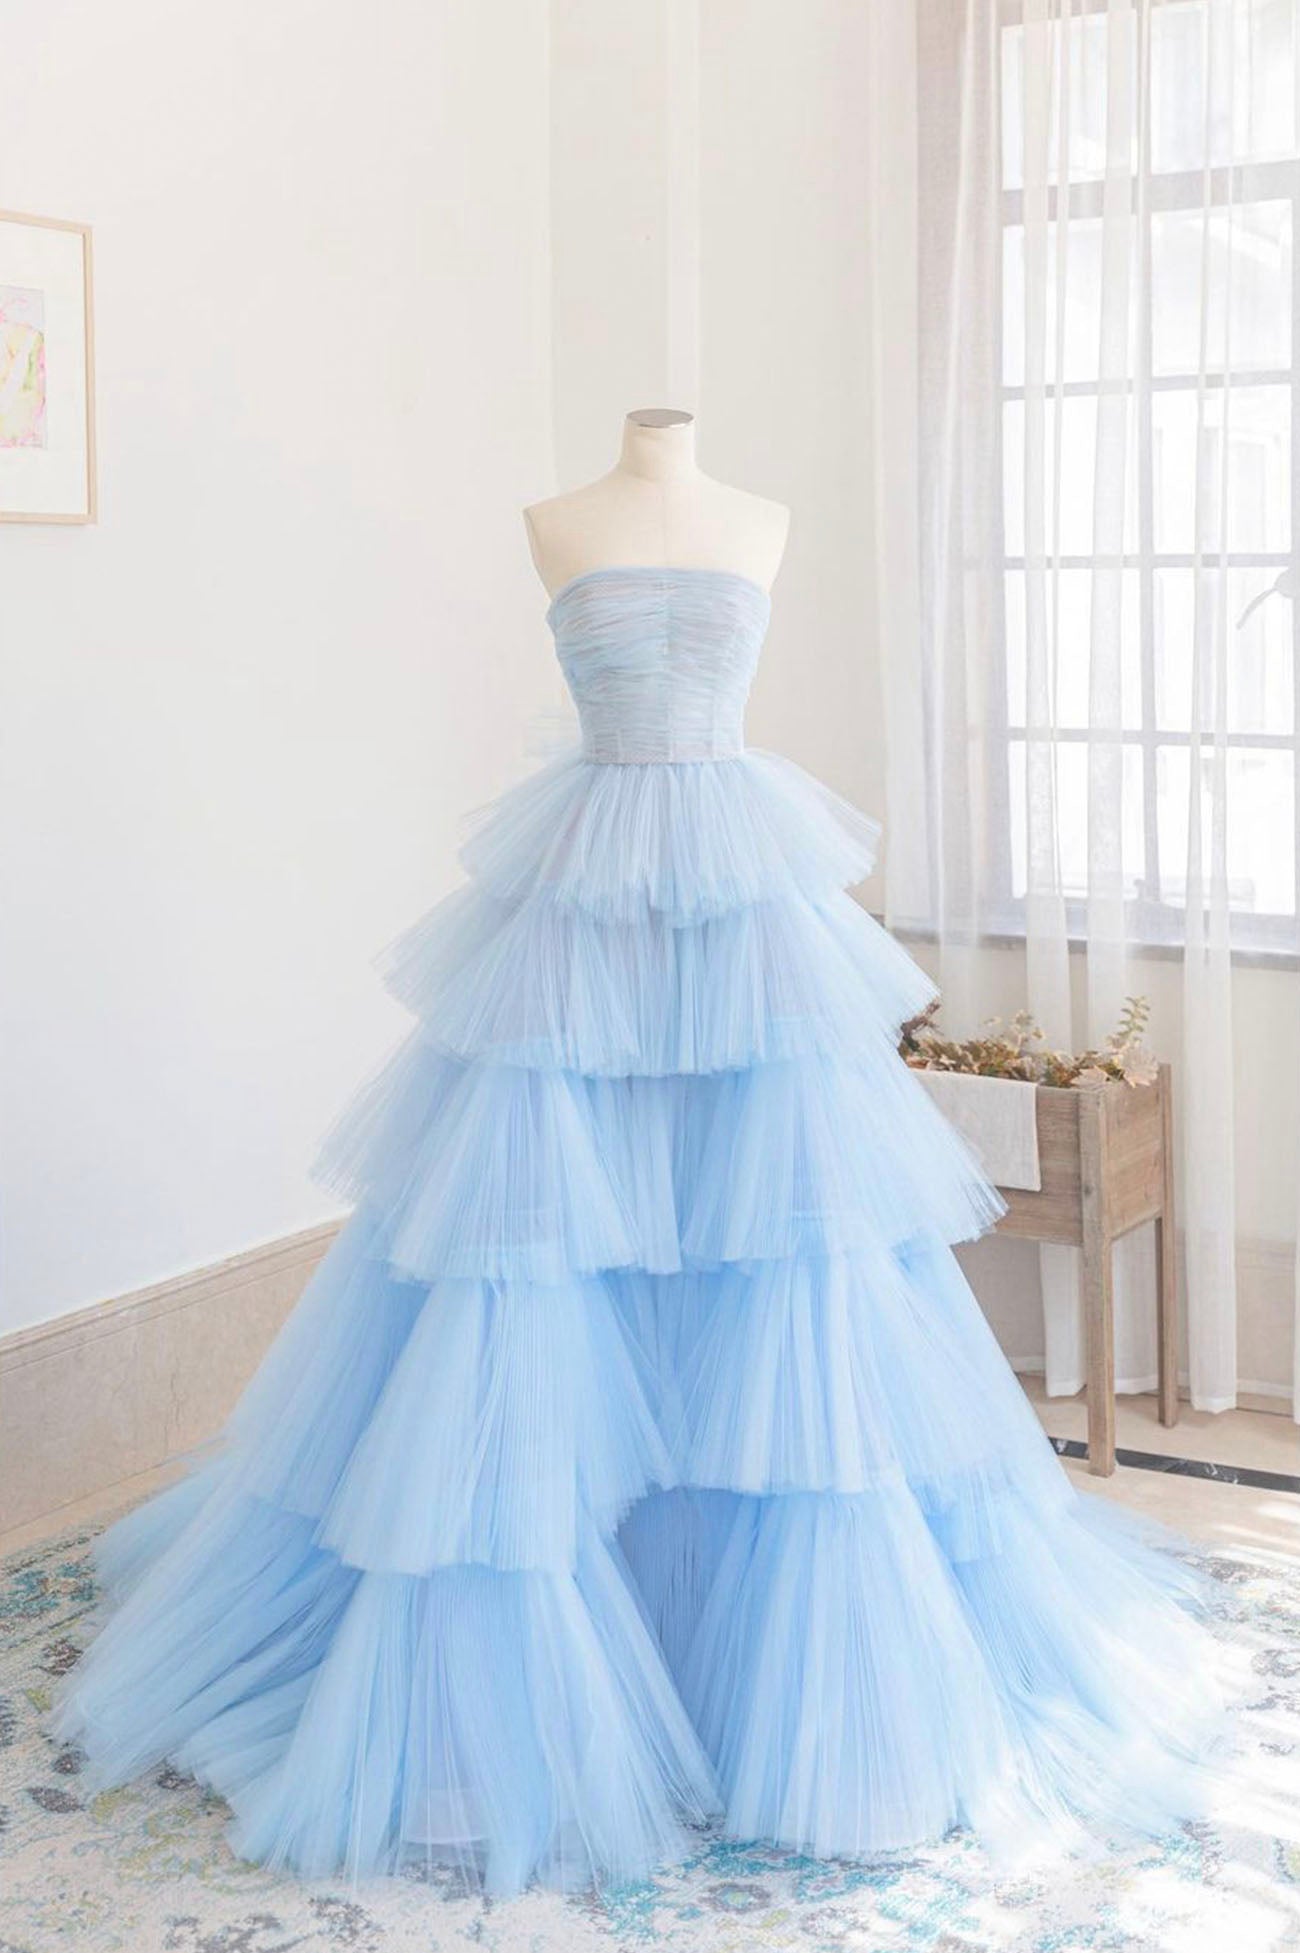 Blue Layers Tulle Long Prom Dresses, A-Line Strapless Evening Dresses